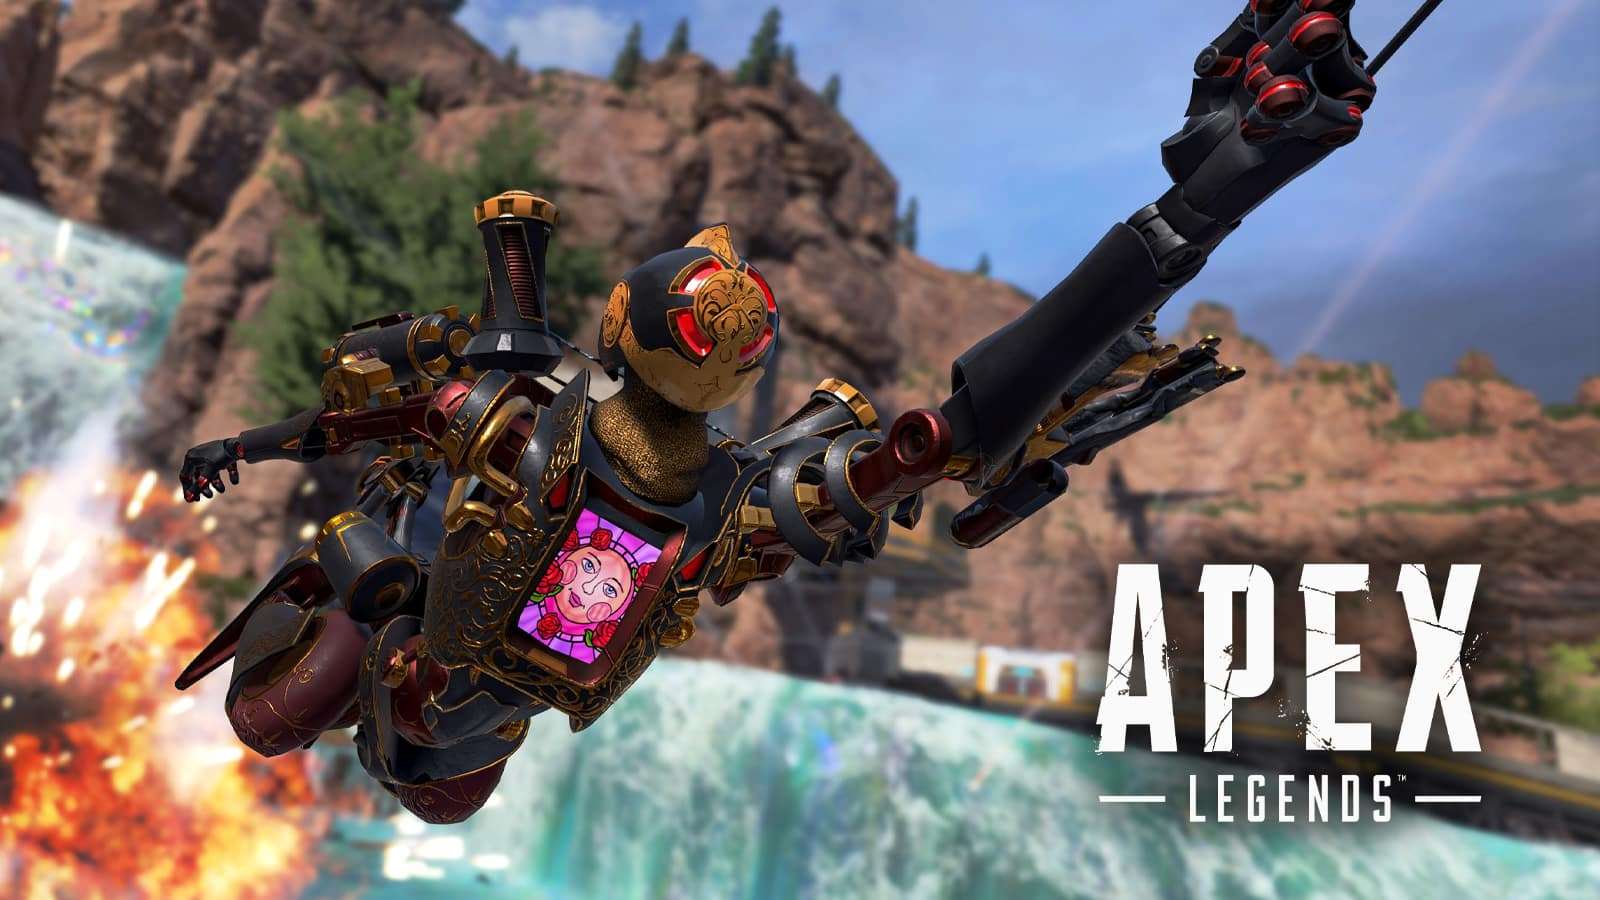 Pathfinder grappling on King's Canyon in Apex Legends